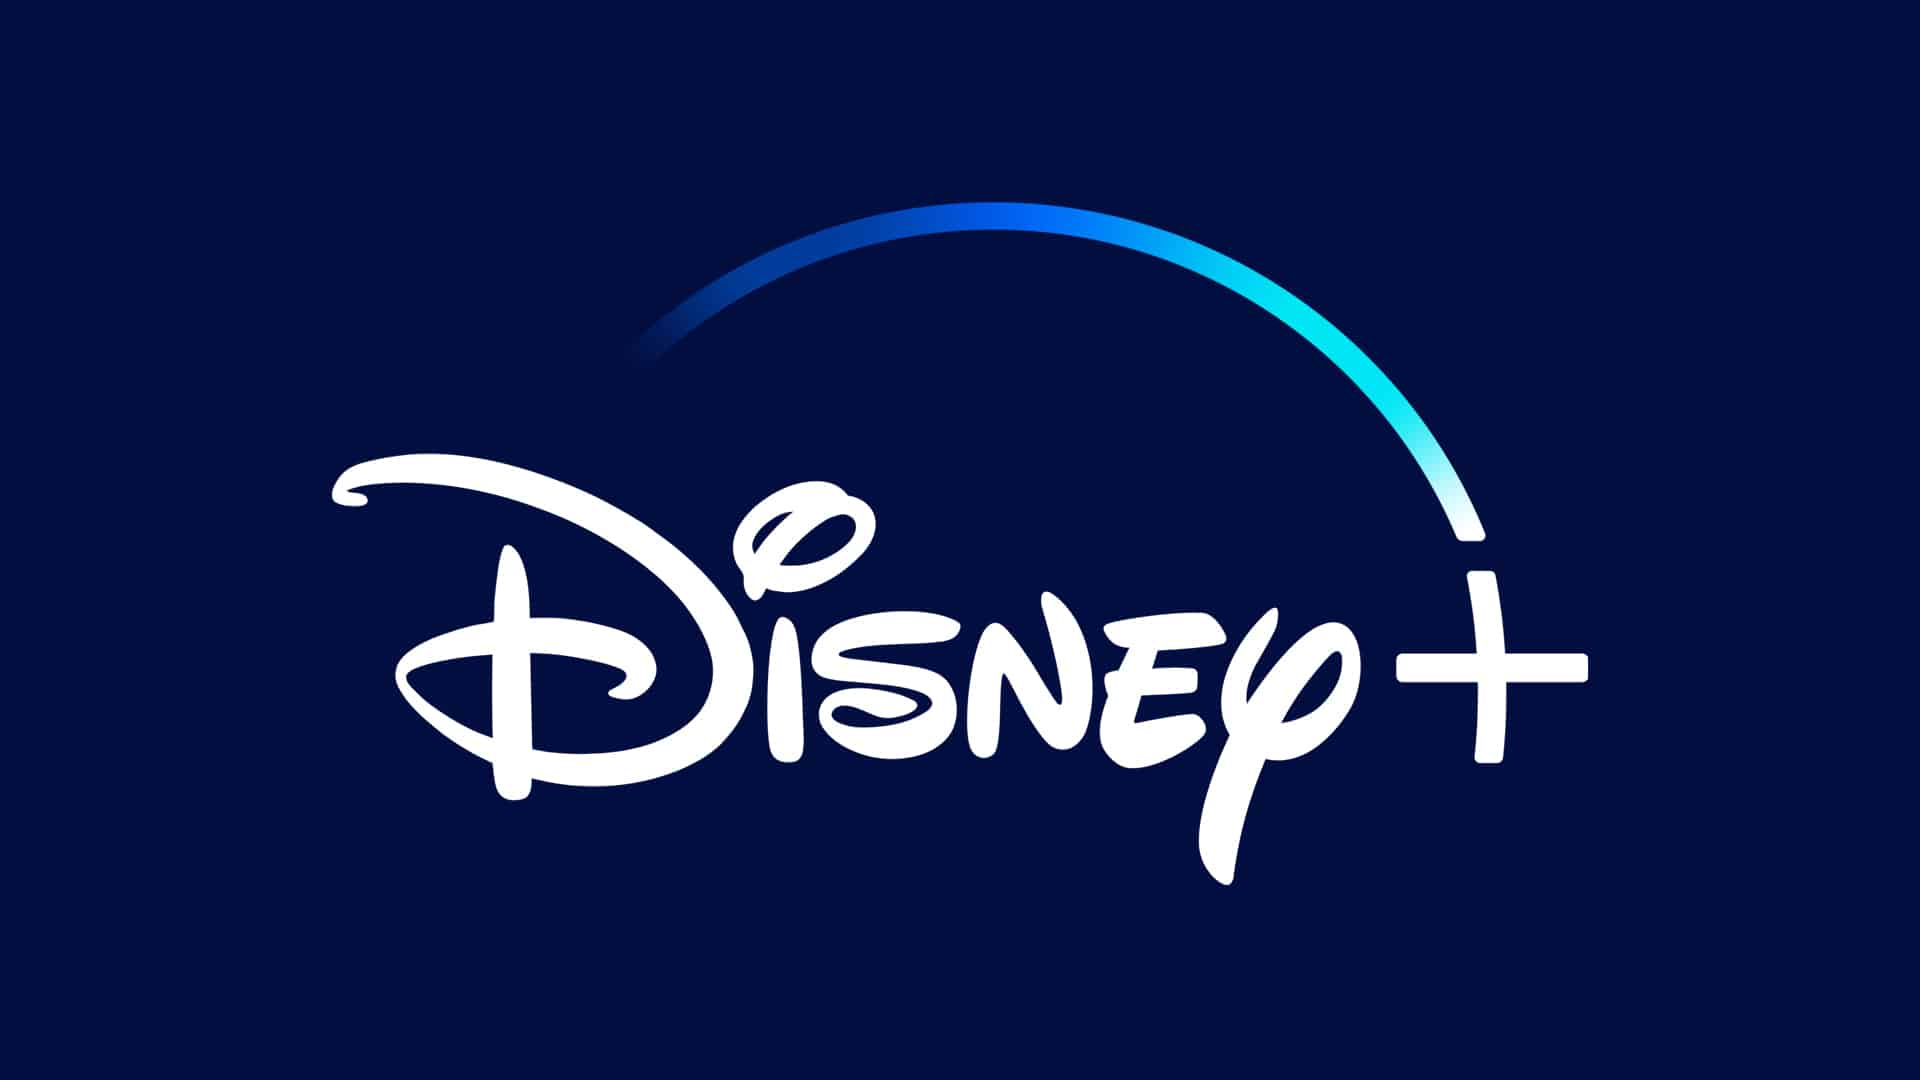 No, You Can’t Region Spoof the Disney+ App on PlayStation, Xbox or Really Anything